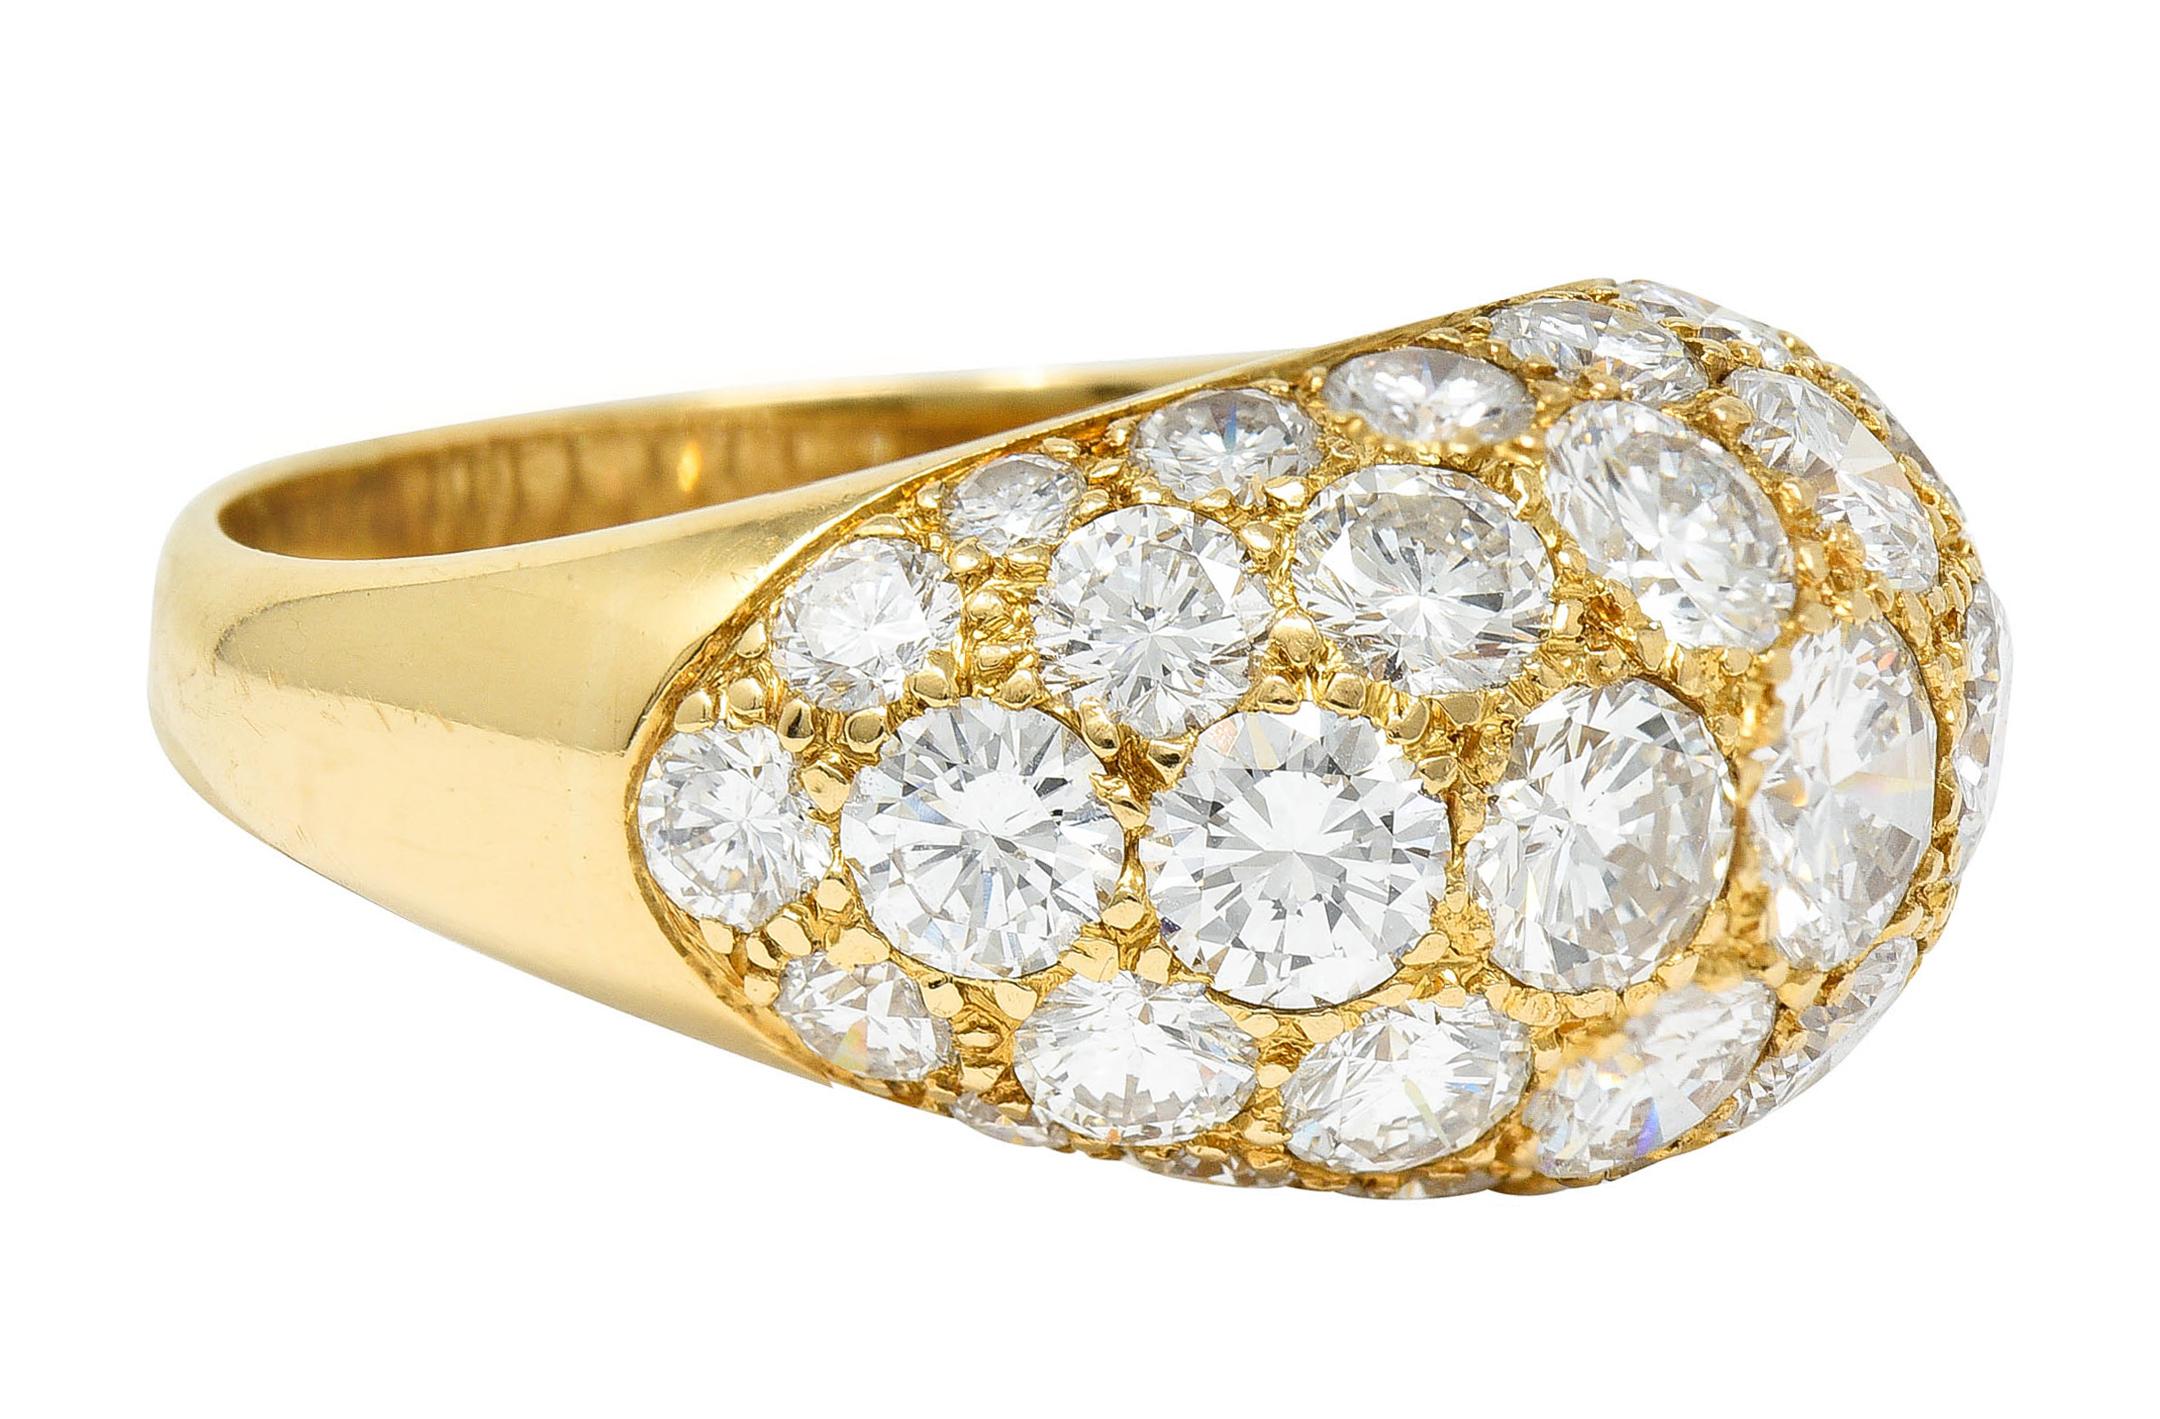 Domed bombè style band is pavè set to front with round brilliant cut diamonds

Graduating in size while weighing in total approximately 7.50 carats - G to I color with VS clarity

Stamped 18K for 18 karat gold

Numbered with maker's mark for Oscar